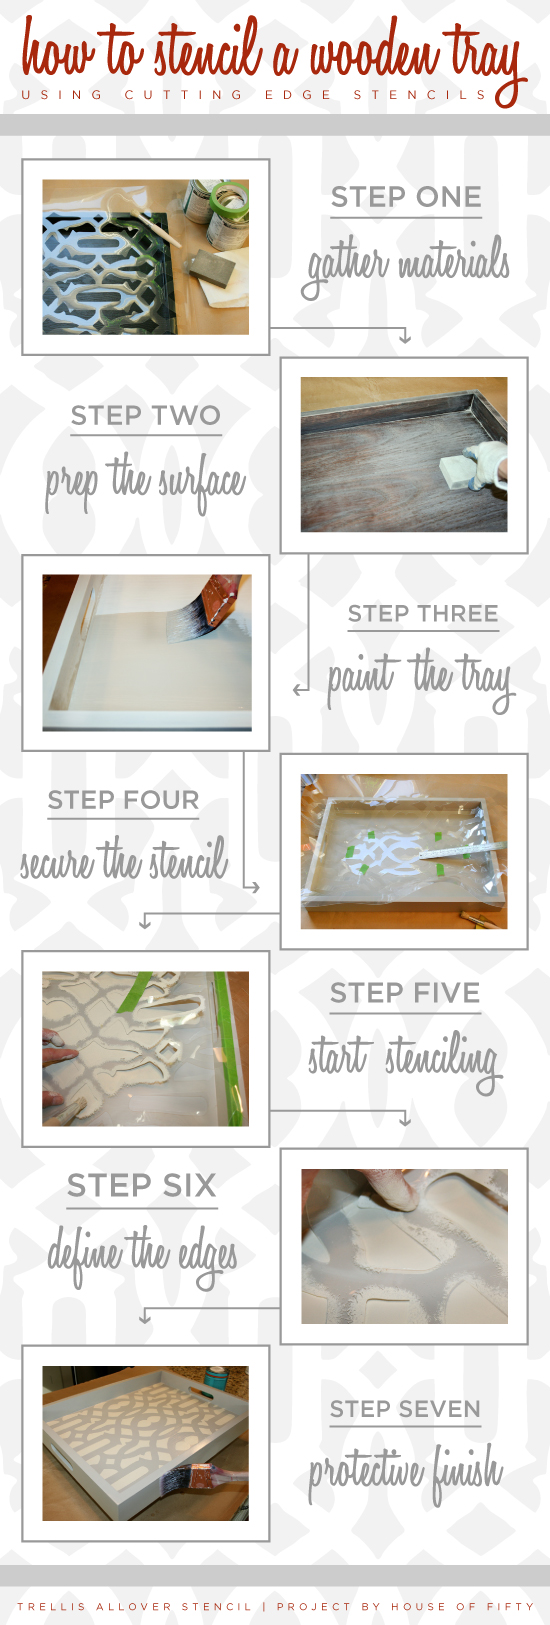 Simples steps to learning how to stencil a wooden tray using stencils from Cutting Edge Stencils! http://www.cuttingedgestencils.com/allover-stencil.html